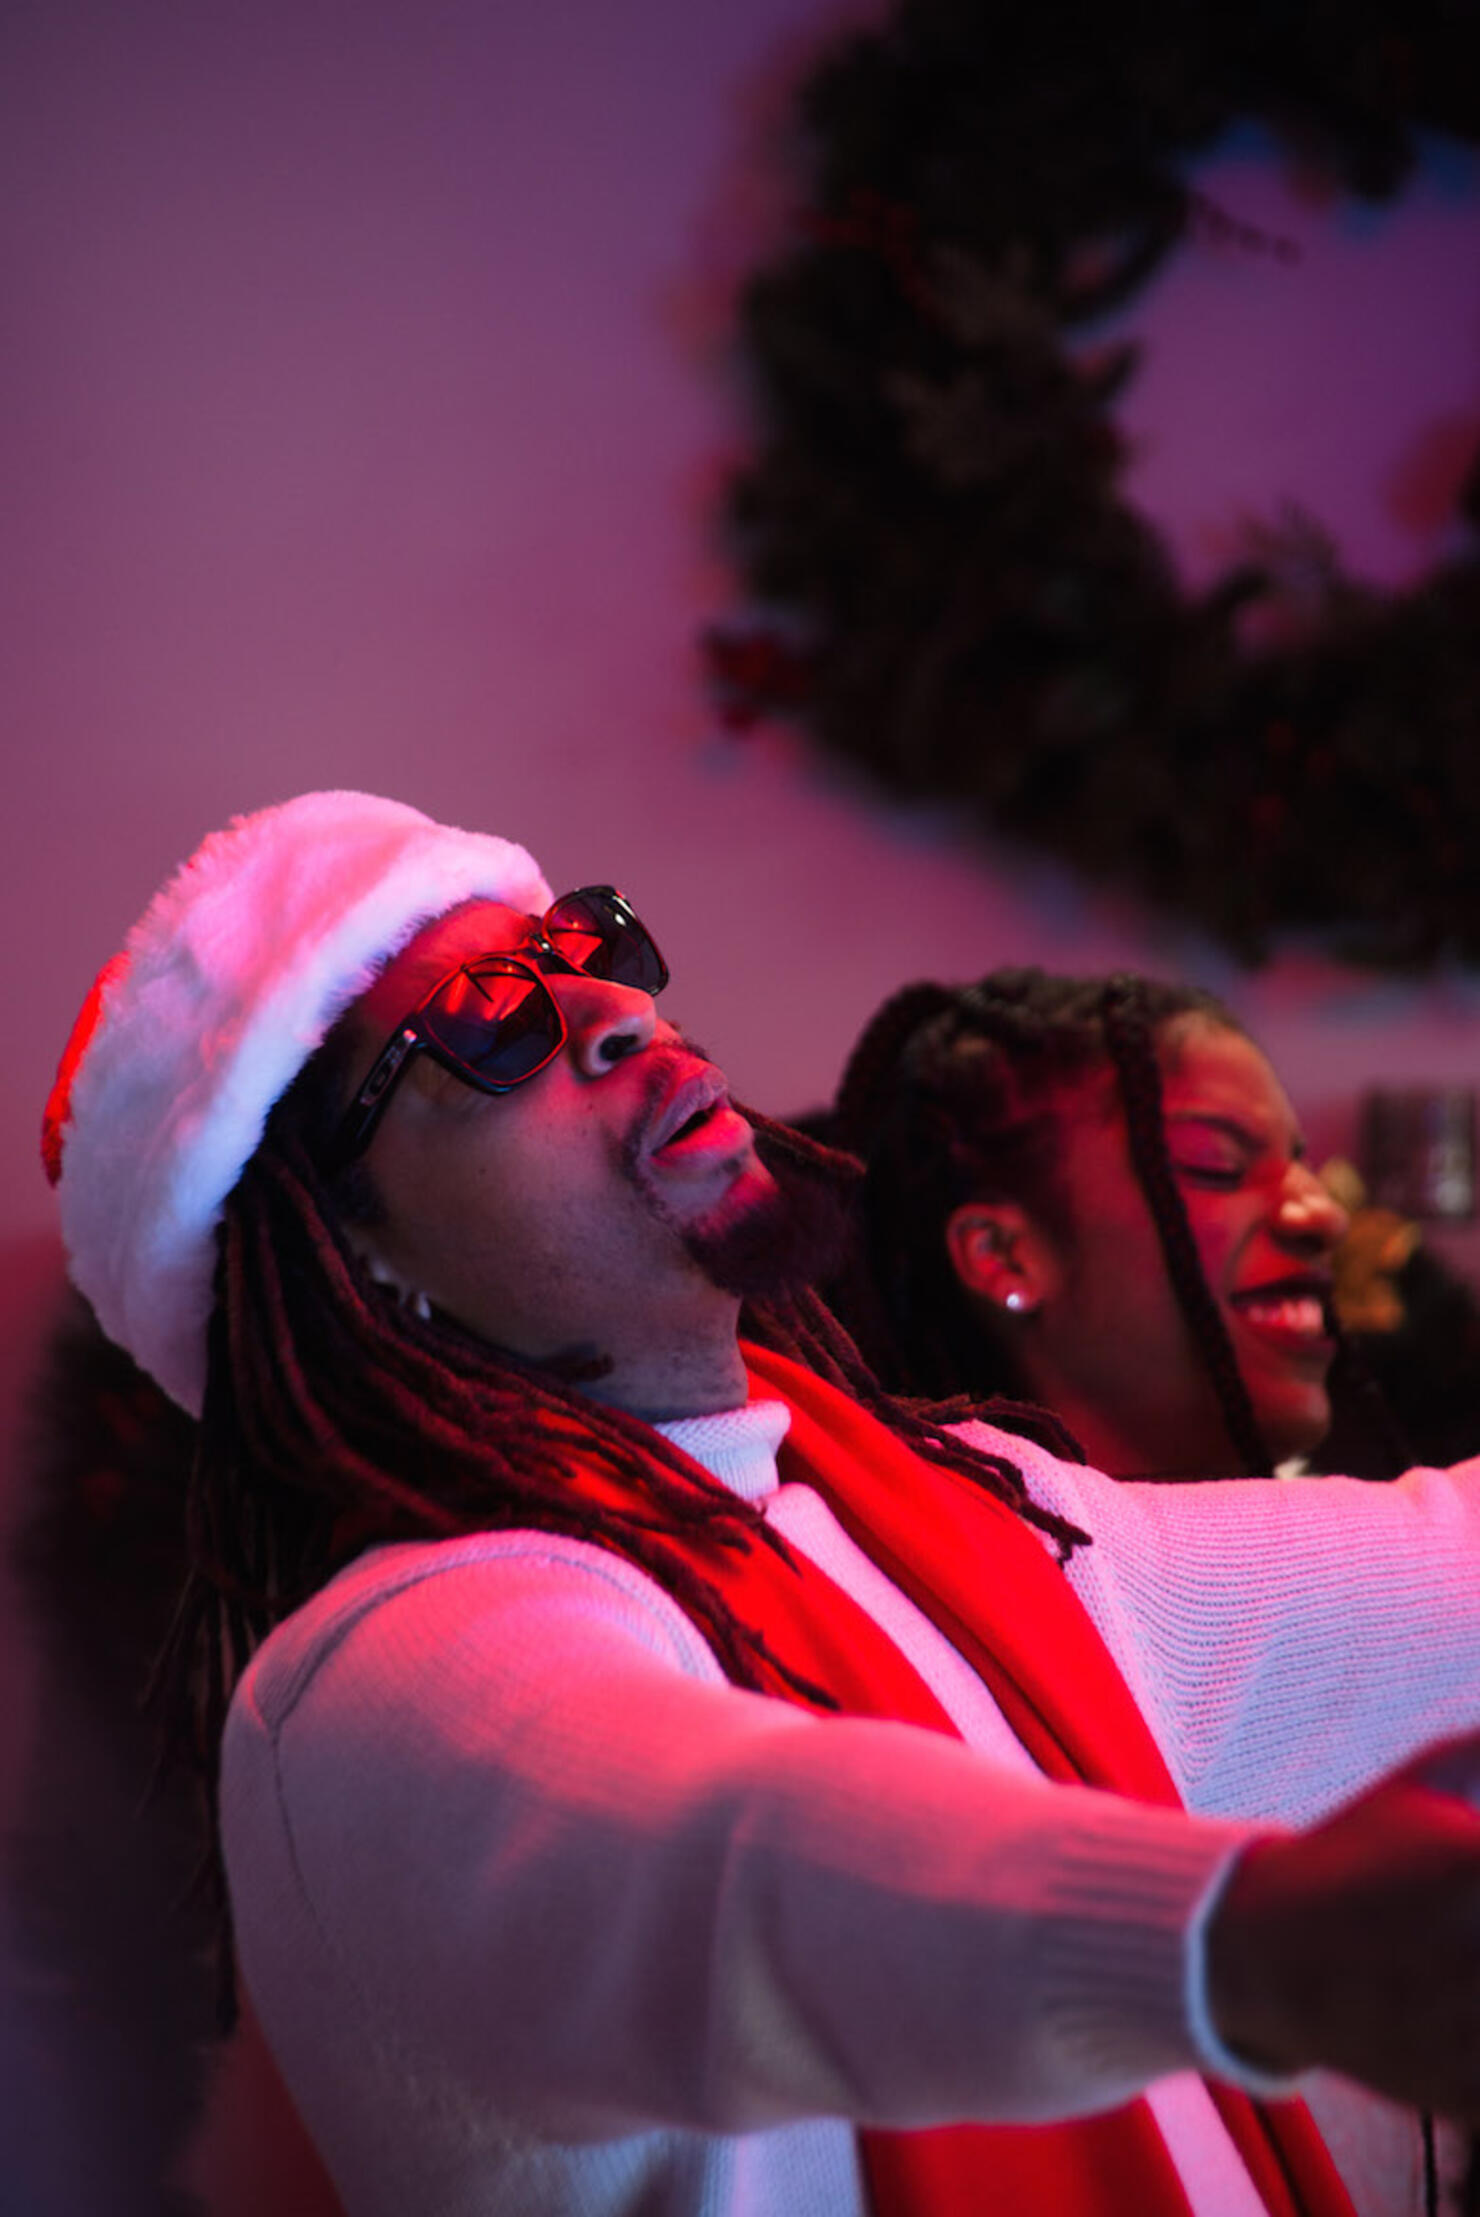 Lil Jon "All I Really Want For Christmas" Music Video